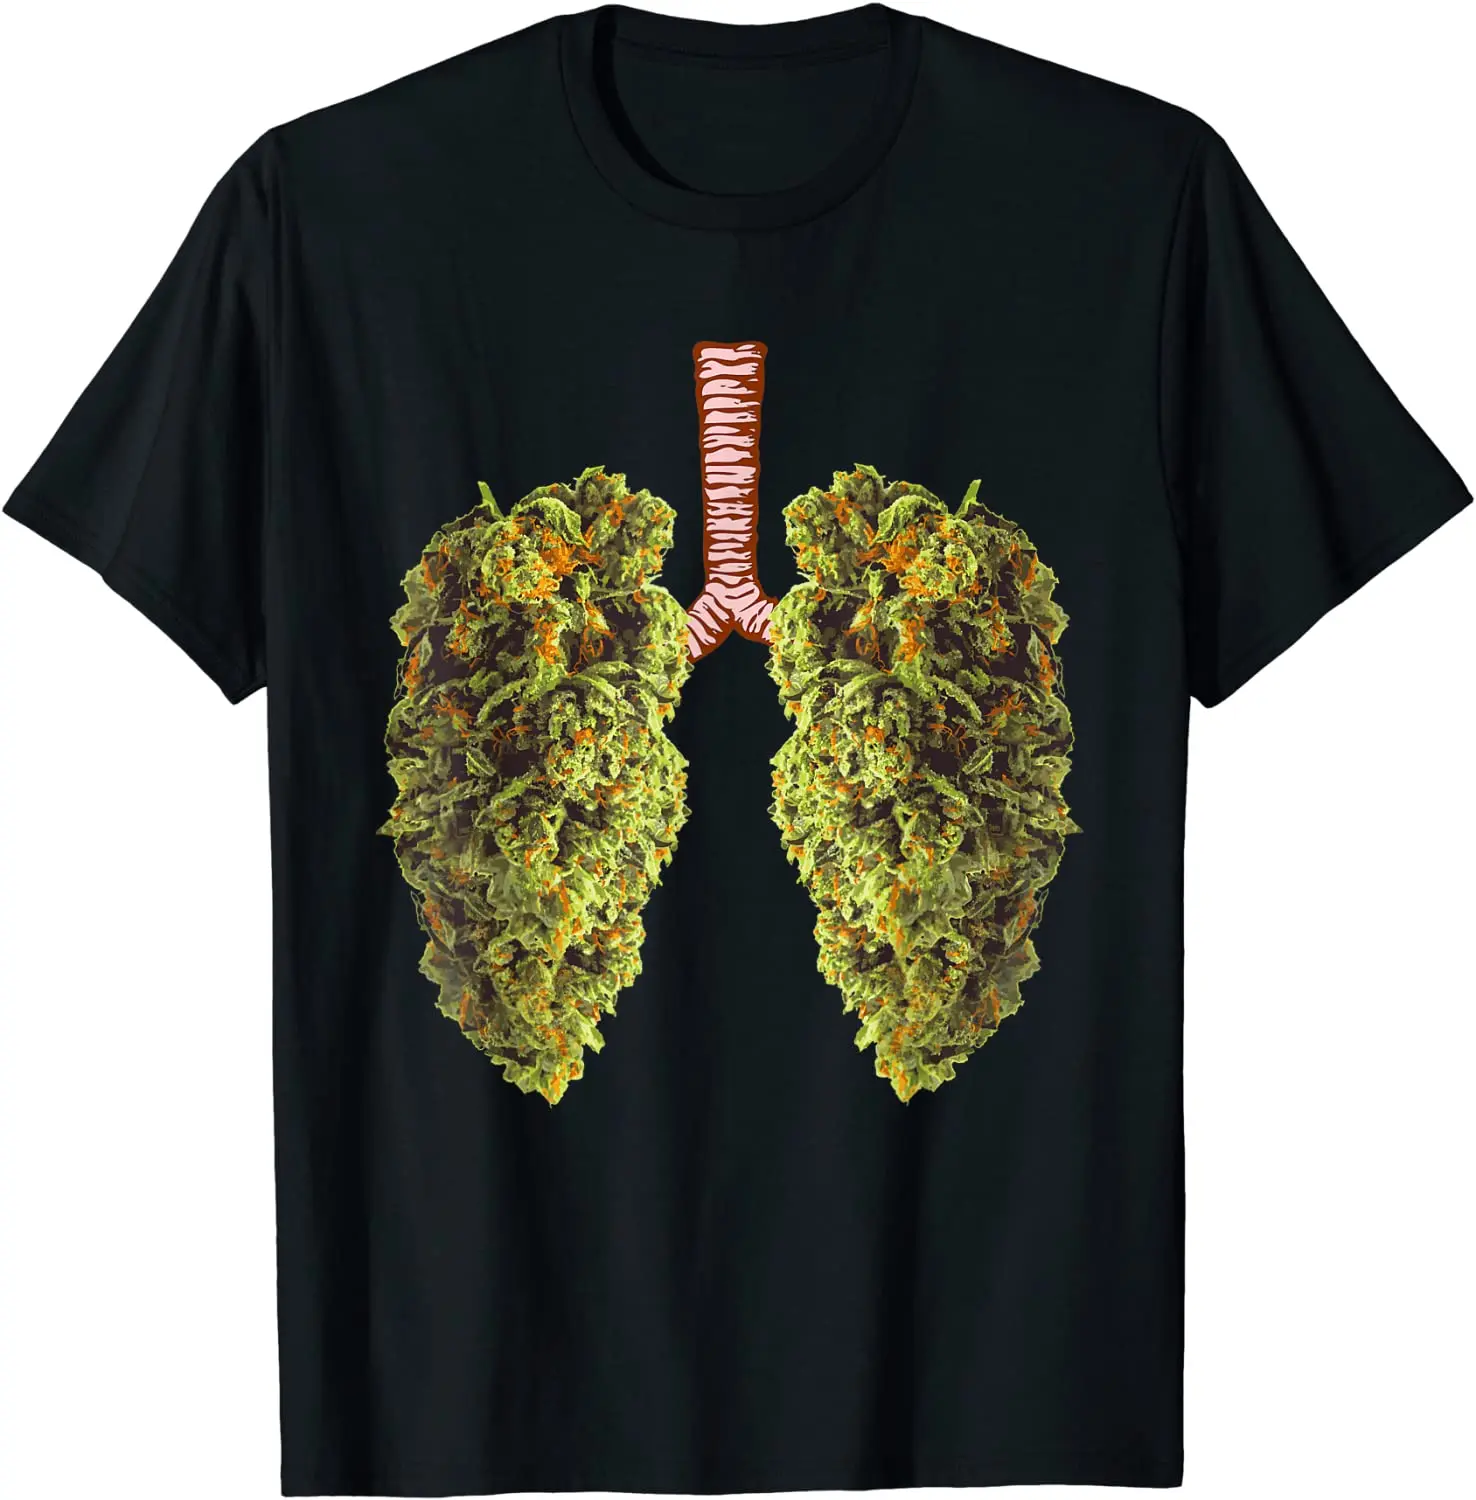 

Funny Weed Lung Bud T-Shirt - THC Lung TShirt T-Shirt Oversized Male Top T-shirts Normal Tops & Tees Cotton Unique